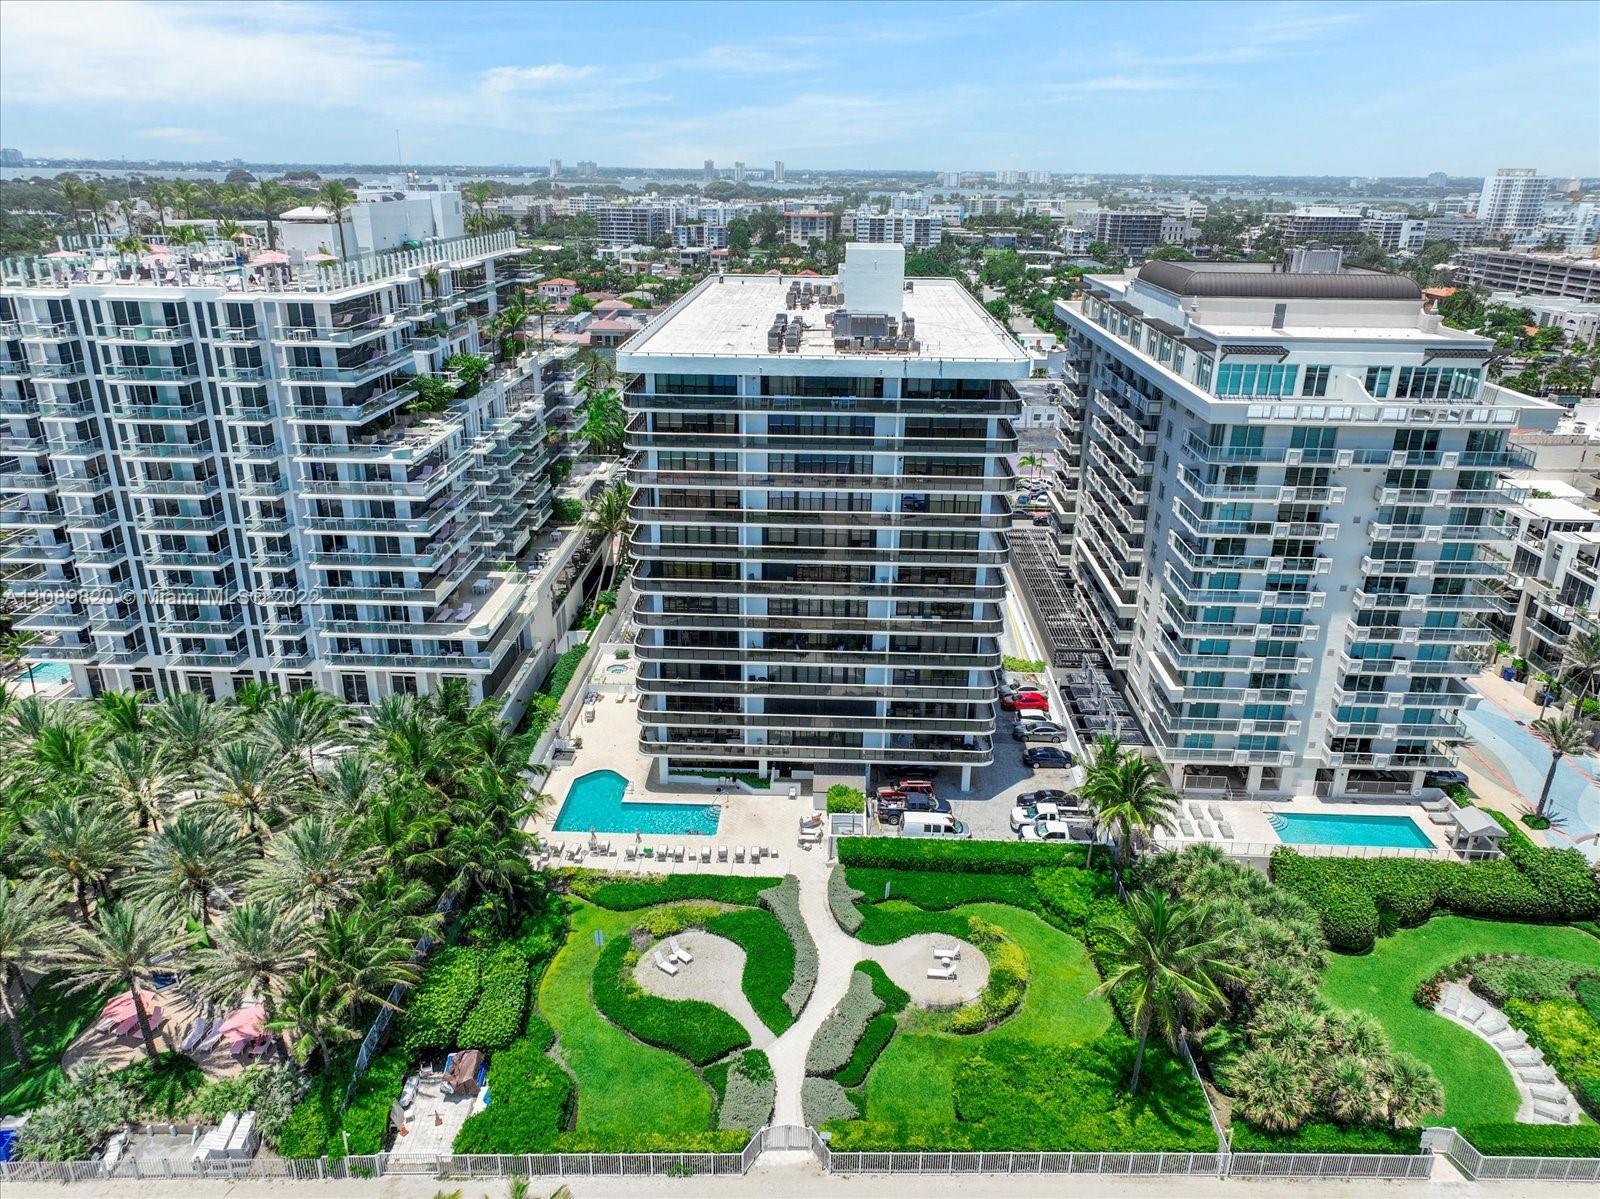 Direct Oceanfront Condo! Location! Location! Location! Welcome to The Waves Condominium a full-servi